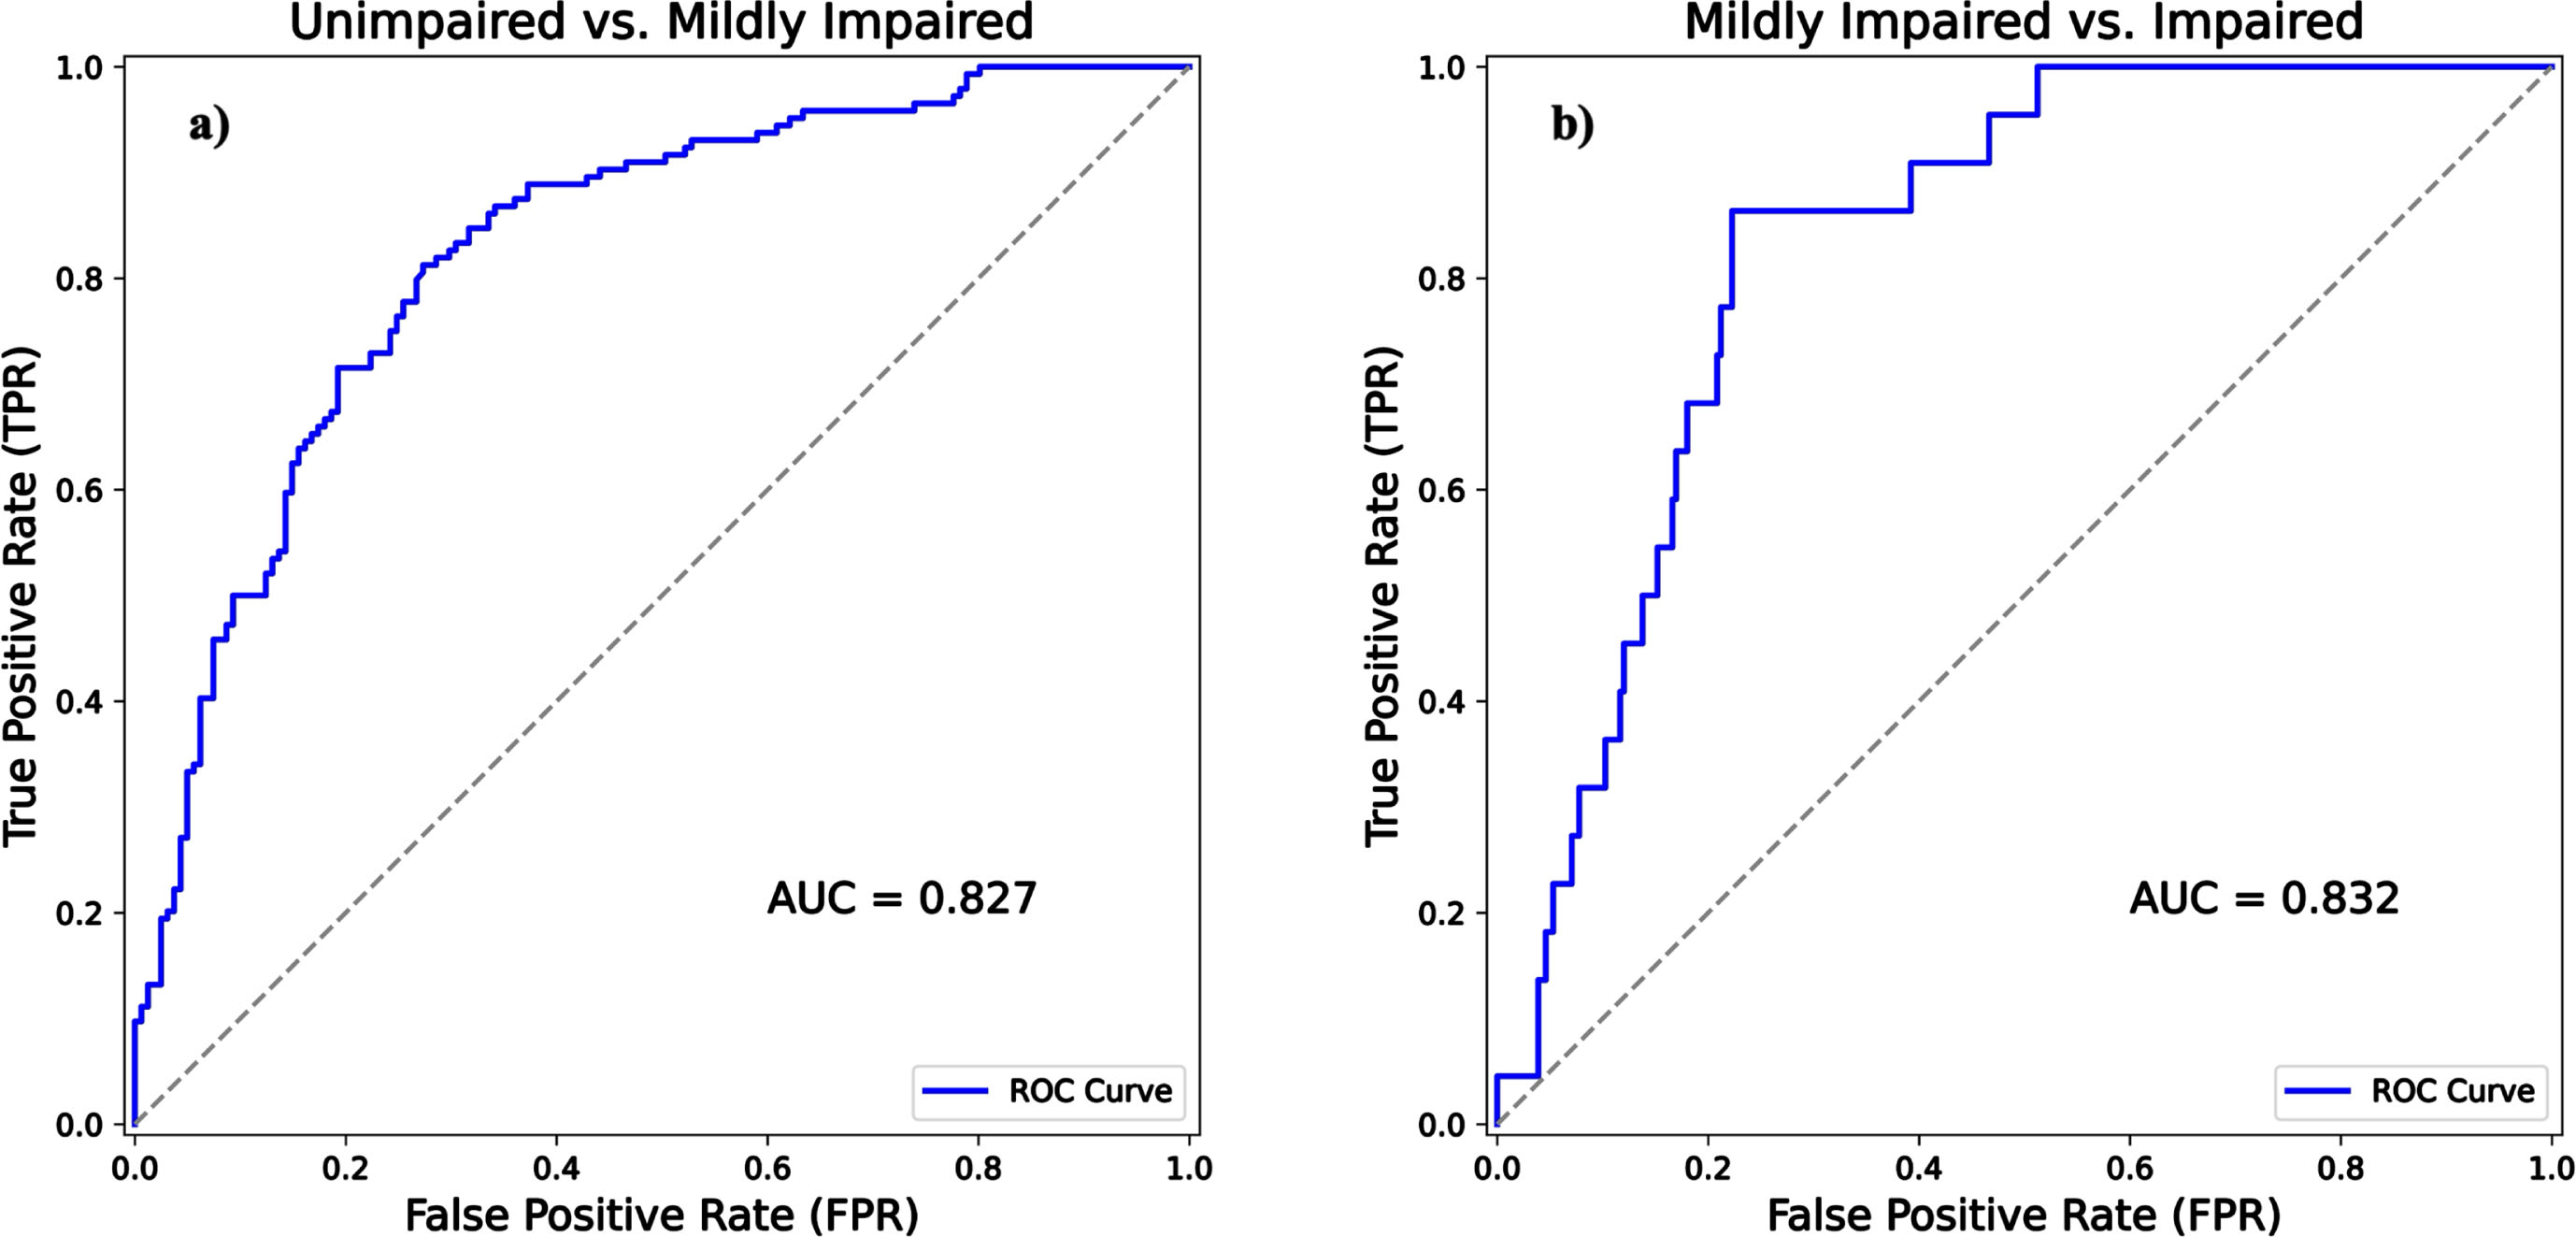 ROC curve analysis with AUCs comparing Beynex test performance against MoCA diagnoses. The solid blue line signifies Beynex’s efficacy in differentiating unimpaired from mildly impaired in (Fig. 4a) and mildly impaired from impaired in (Fig. 4b). The gray dashed line is the reference line of no-discrimination.